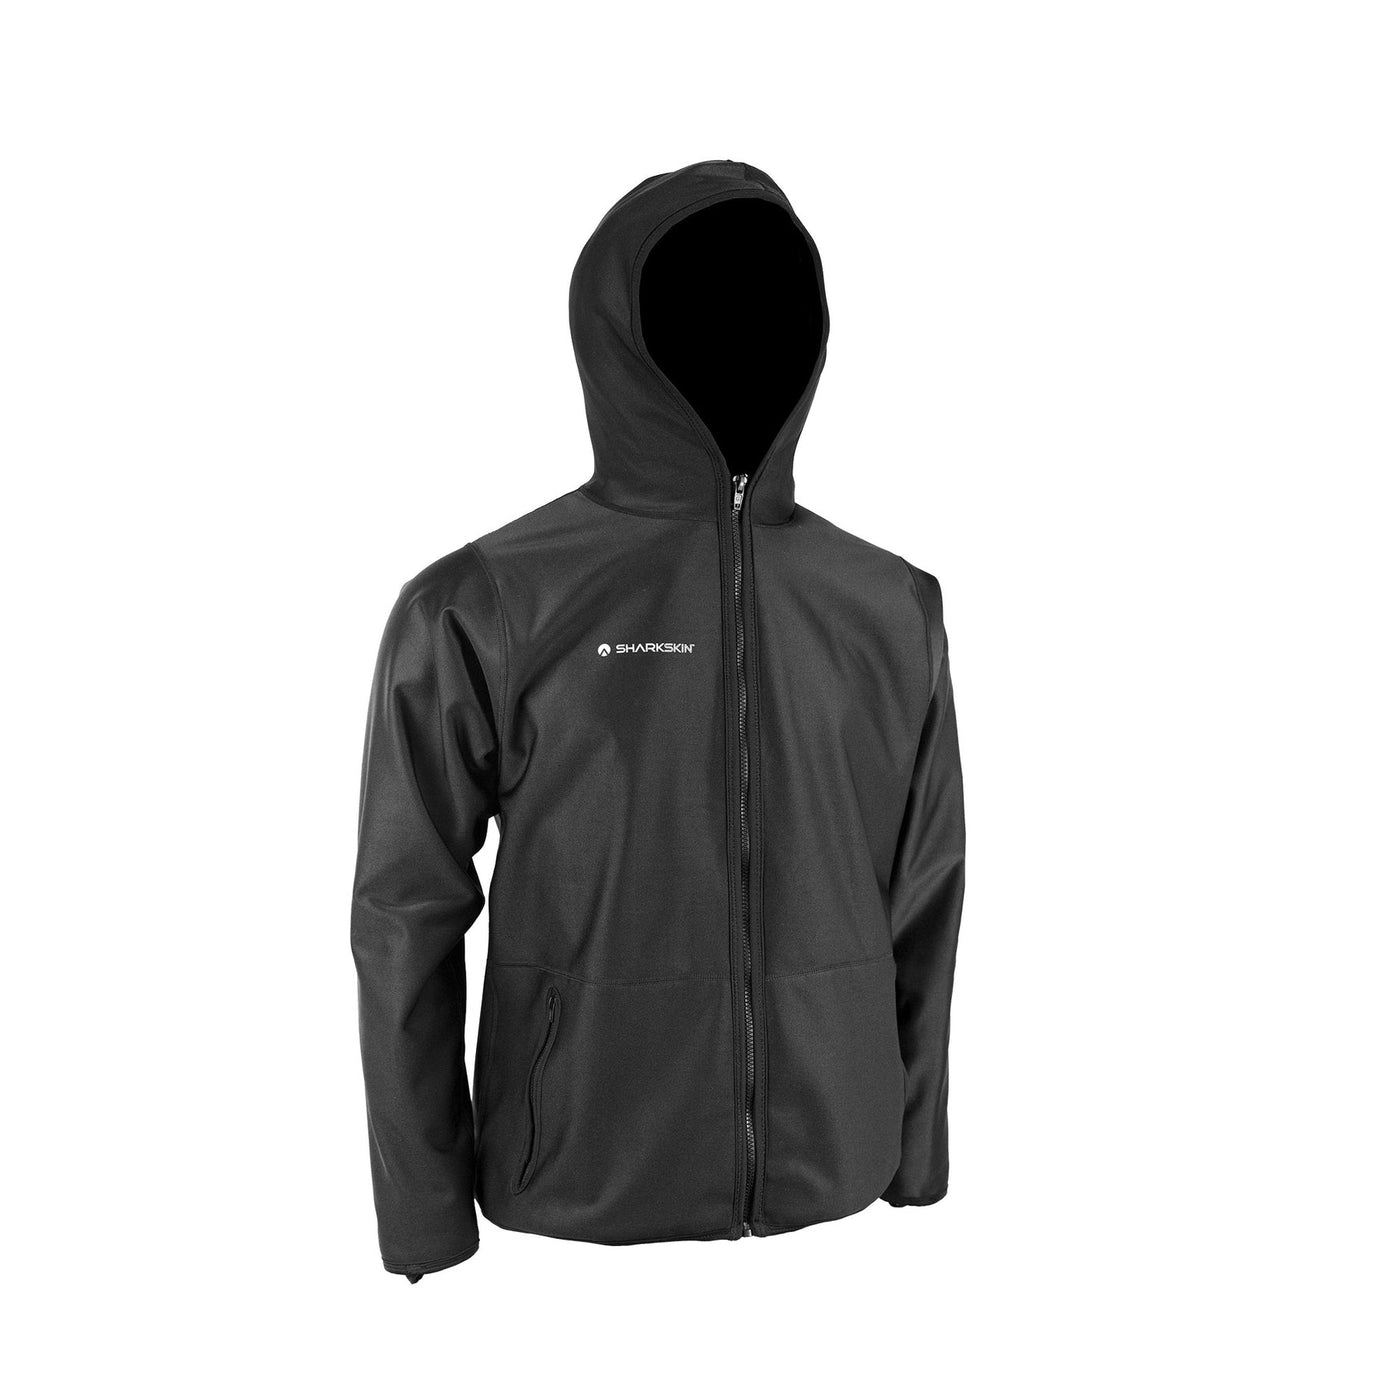 EVERYWEAR CHILLPROOF JACKET HD MENS (SECONDS)